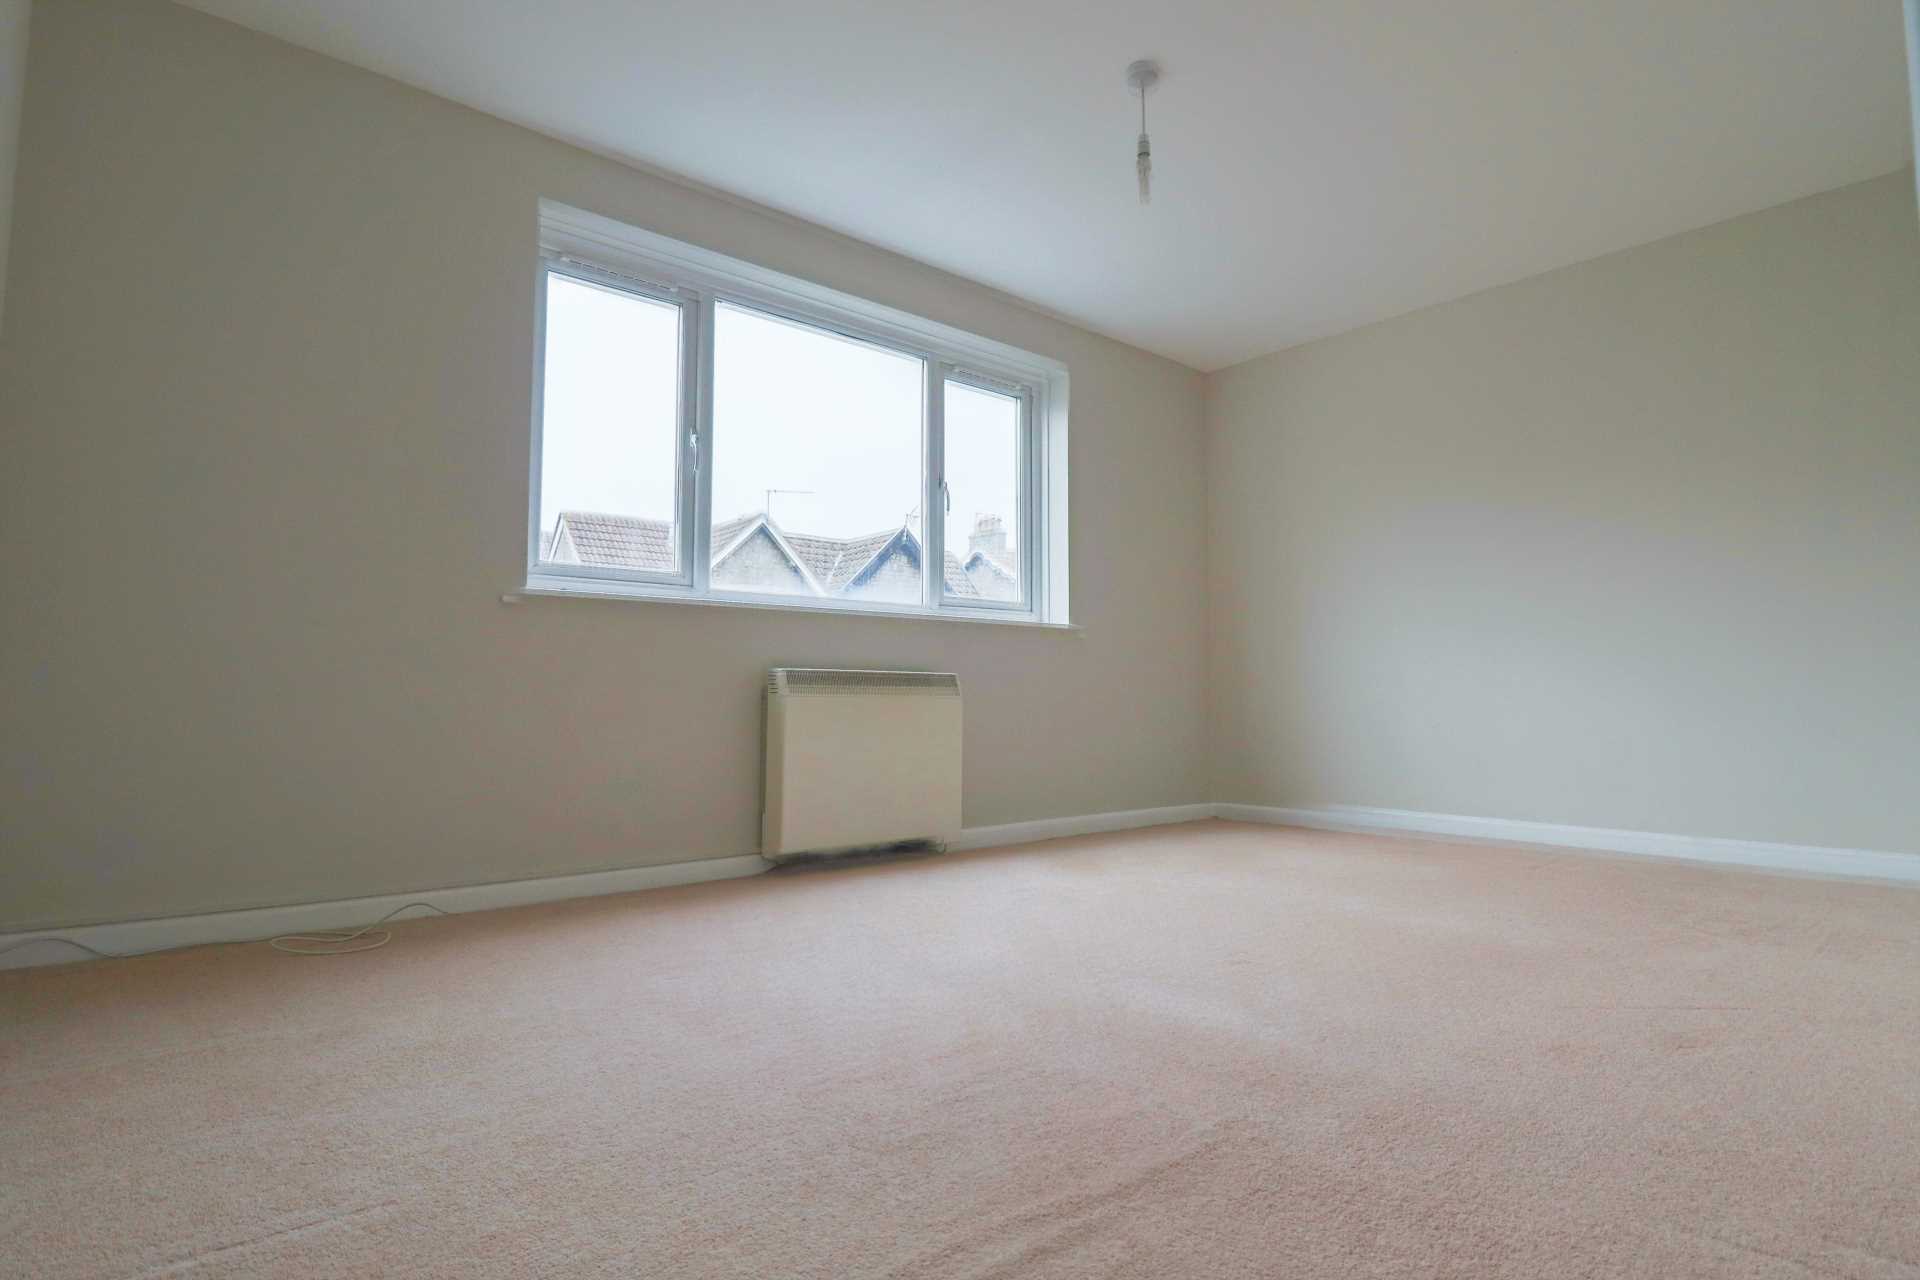 Moorland Road - Spacious Freehold Flat, Image 7